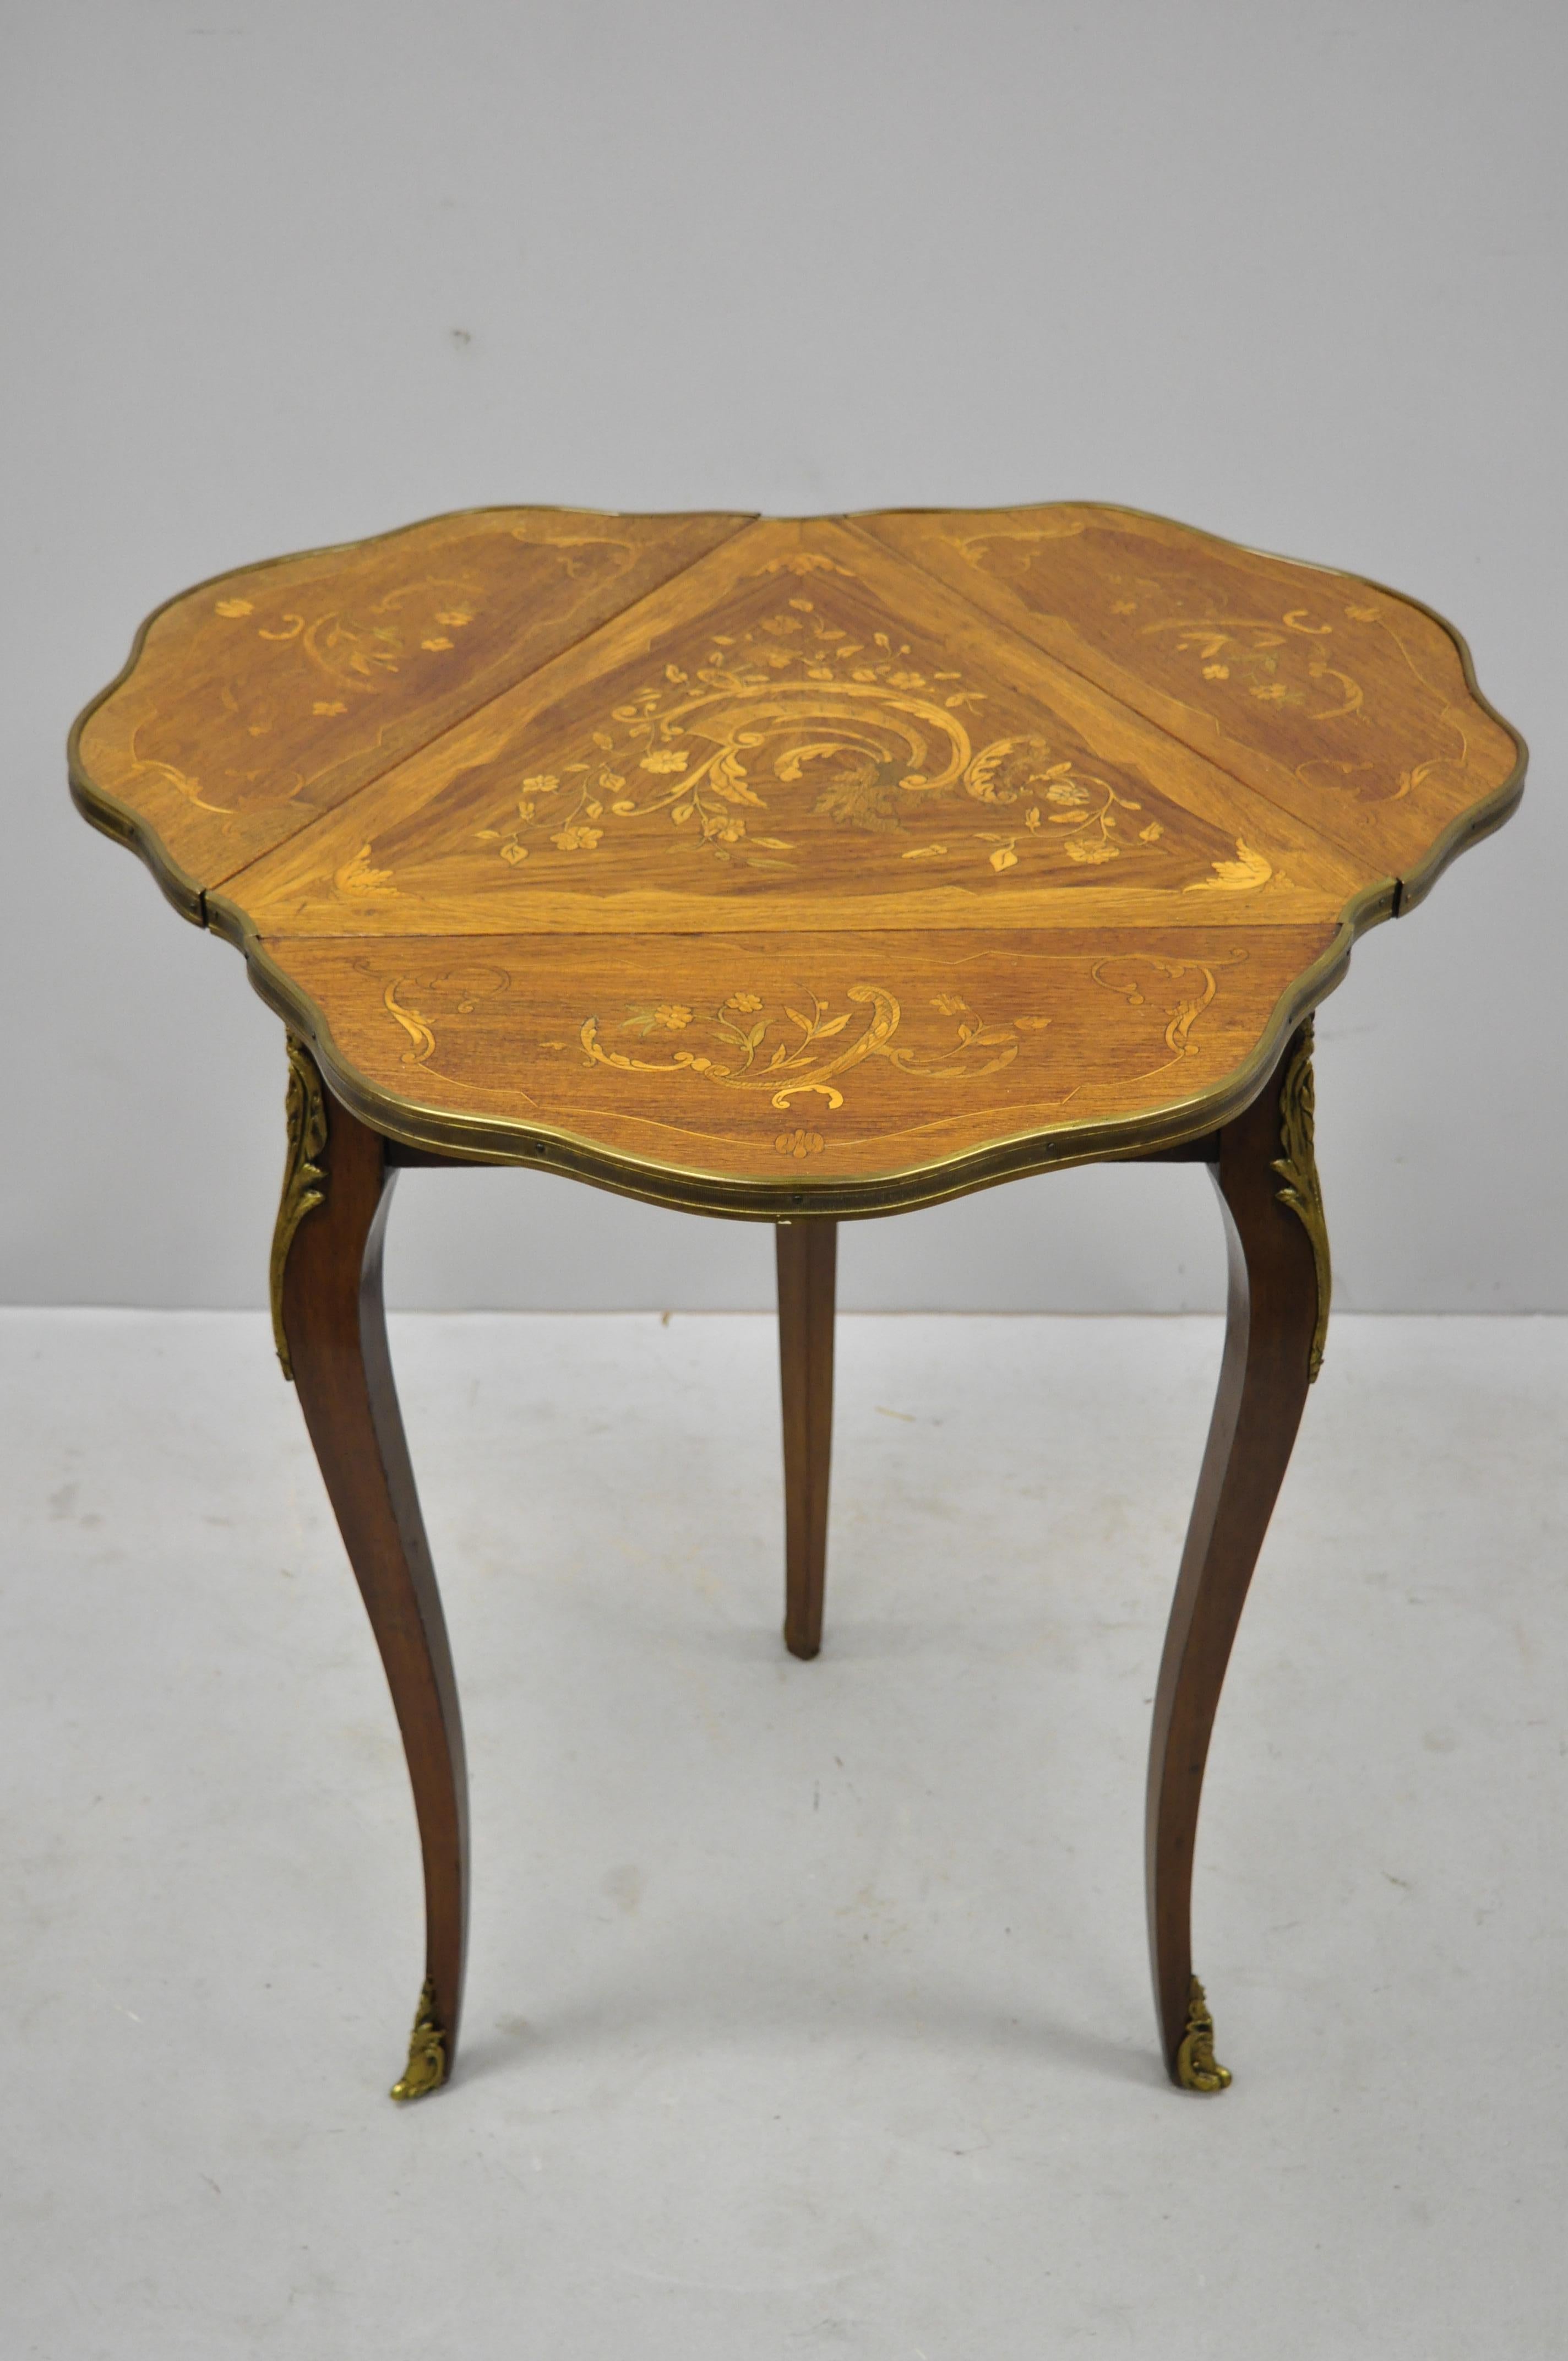 French Louis XV style satinwood inlay drop-leaf side table with bronze ormolu. Item features floral satinwood inlay, bronze ormolu three drop sides, cabriole legs, quality French craftsmanship, stamped 